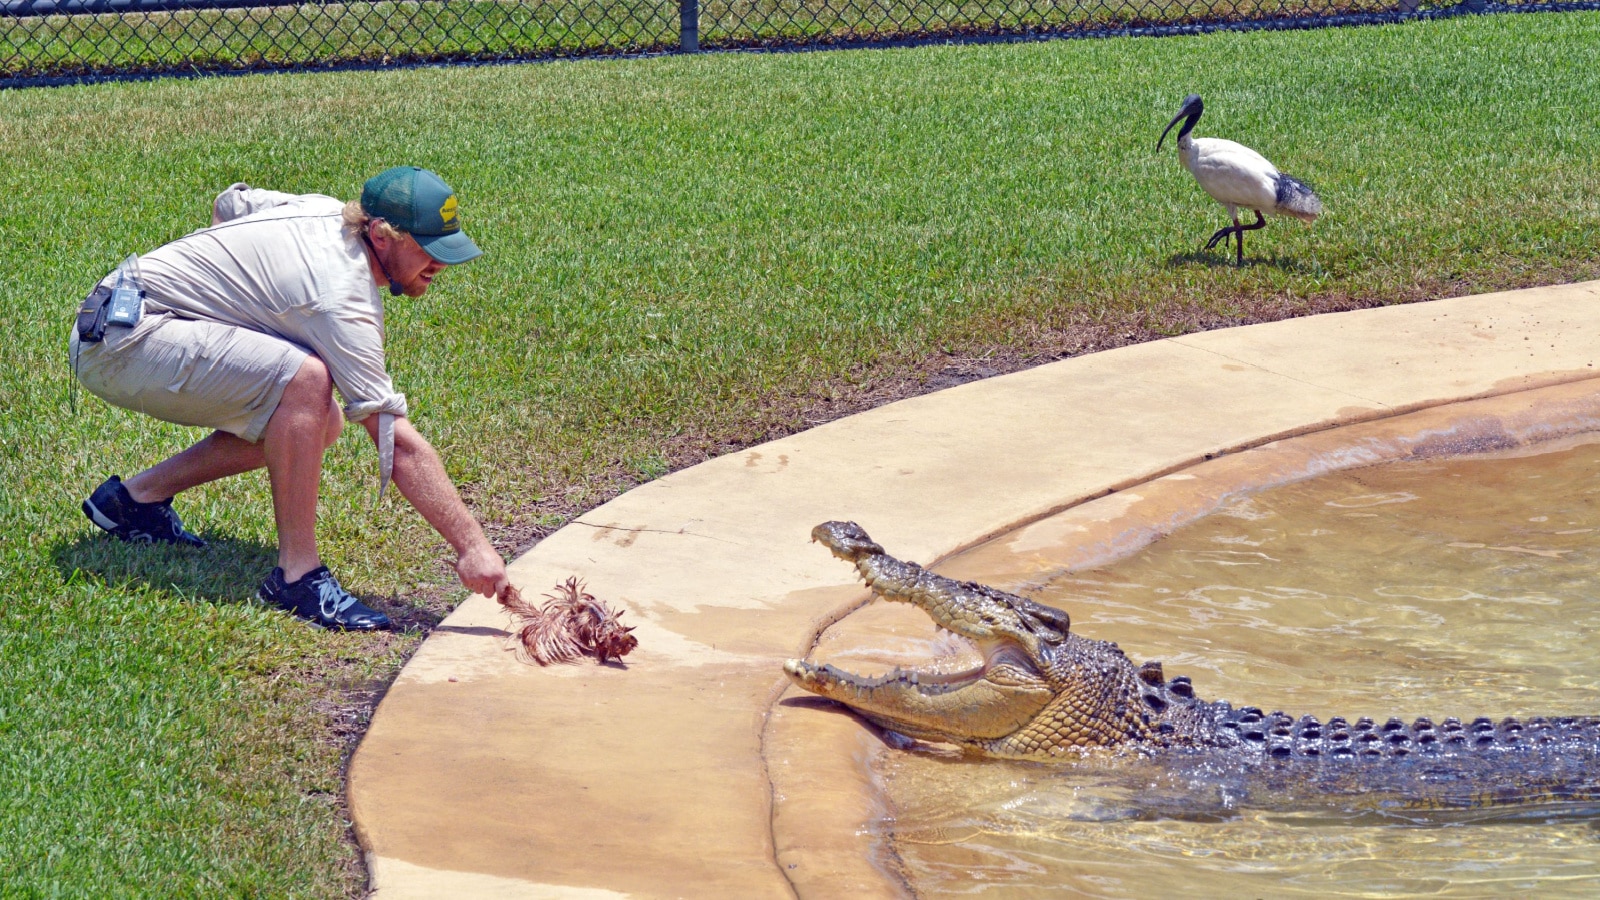 SUNSHINE COAST - JAN 25 2019: Crocodile trainer feeding a large saltwater crocodile a chicken carcass at Australia Zoo.Crocodile trainer consider as is one of the most dangerous jobs in the world